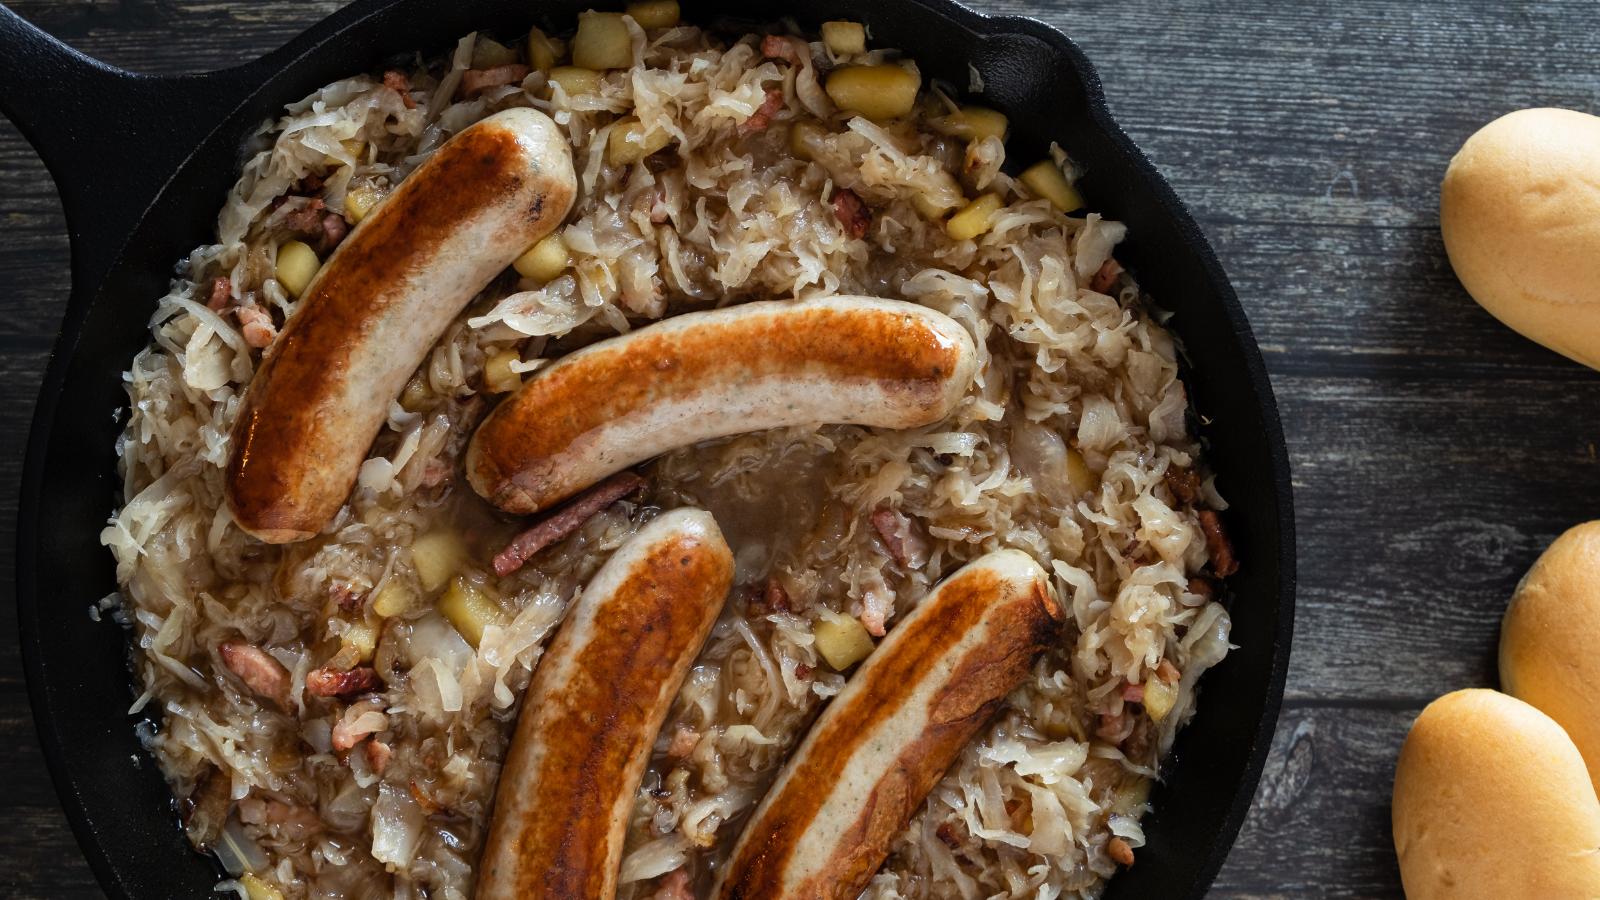 The browned bratwurst sausages in the sauerkraut ready to braise and finish cooking.